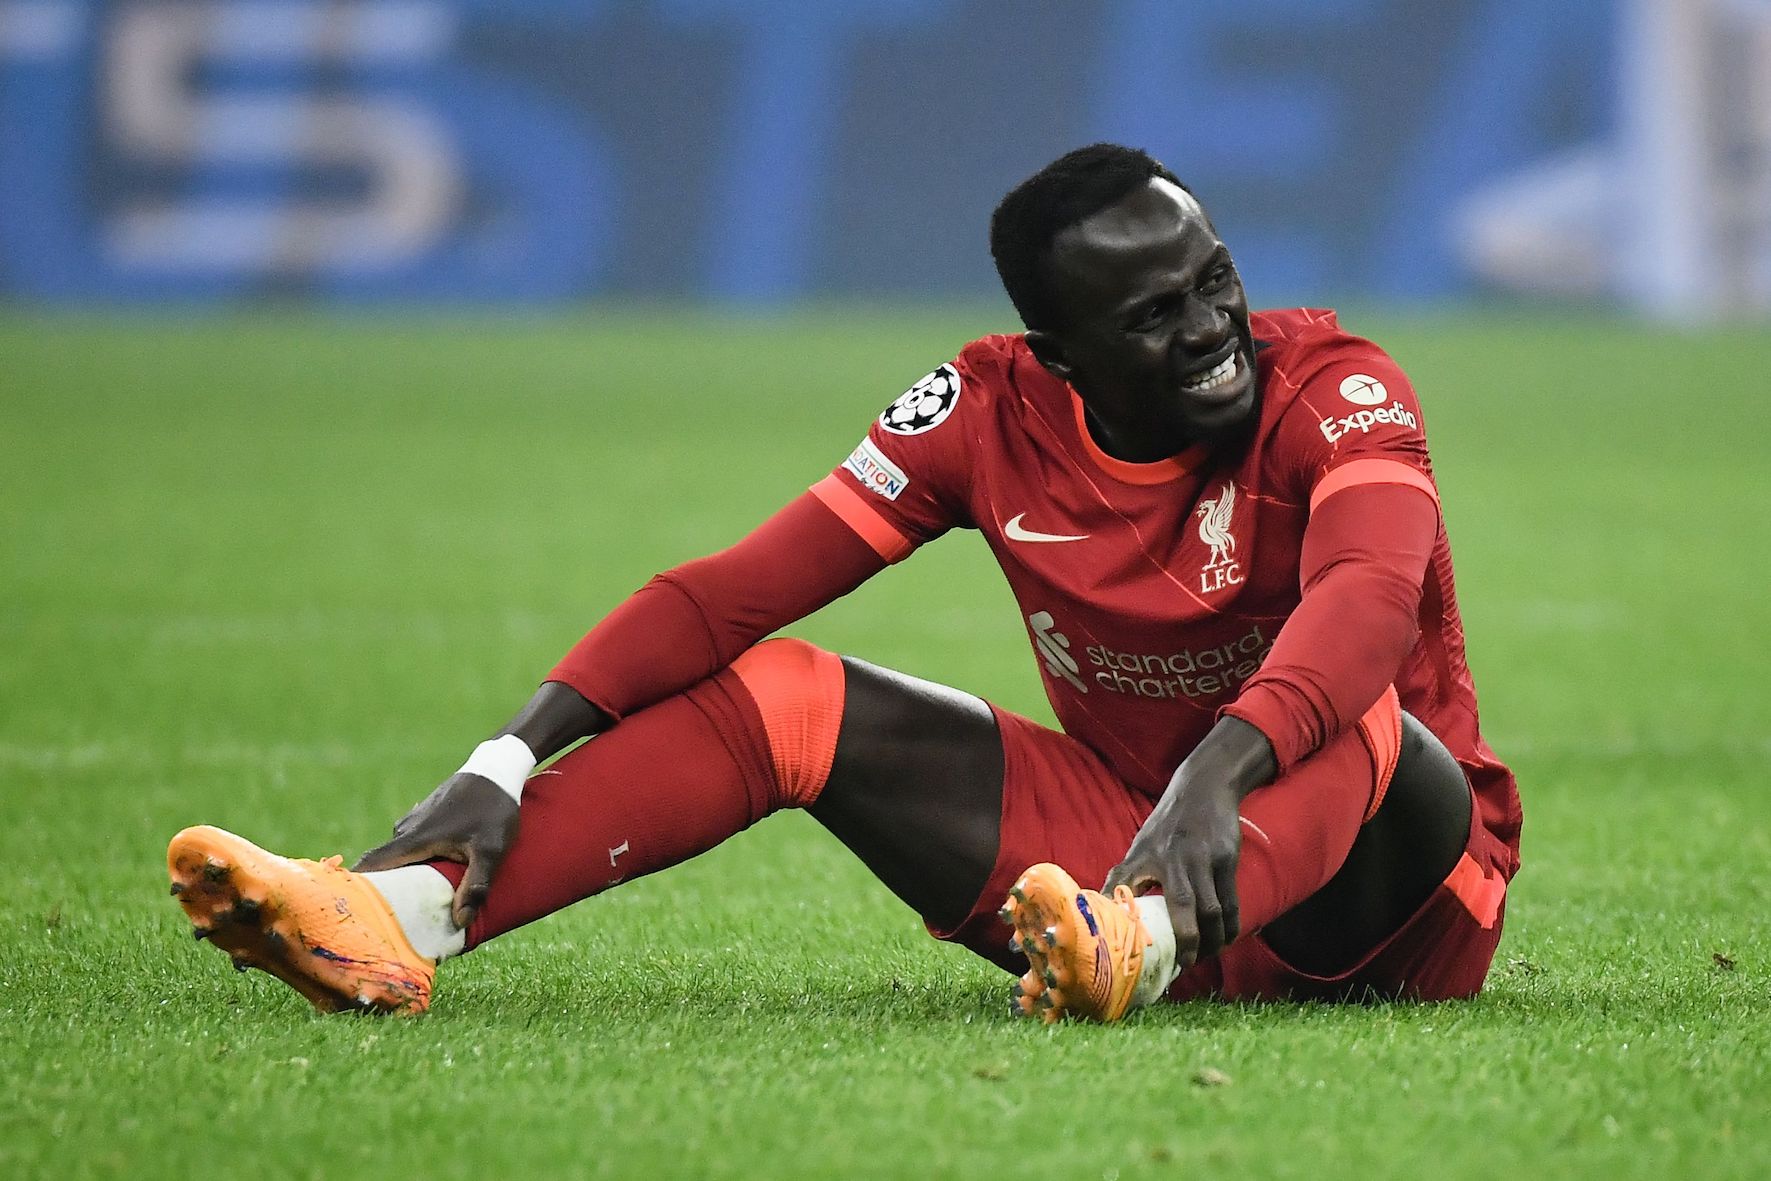 Sadio Mane’s Senegal teammate expresses his admiration for Liverpool star and claims he’d like to play alongside him at club level